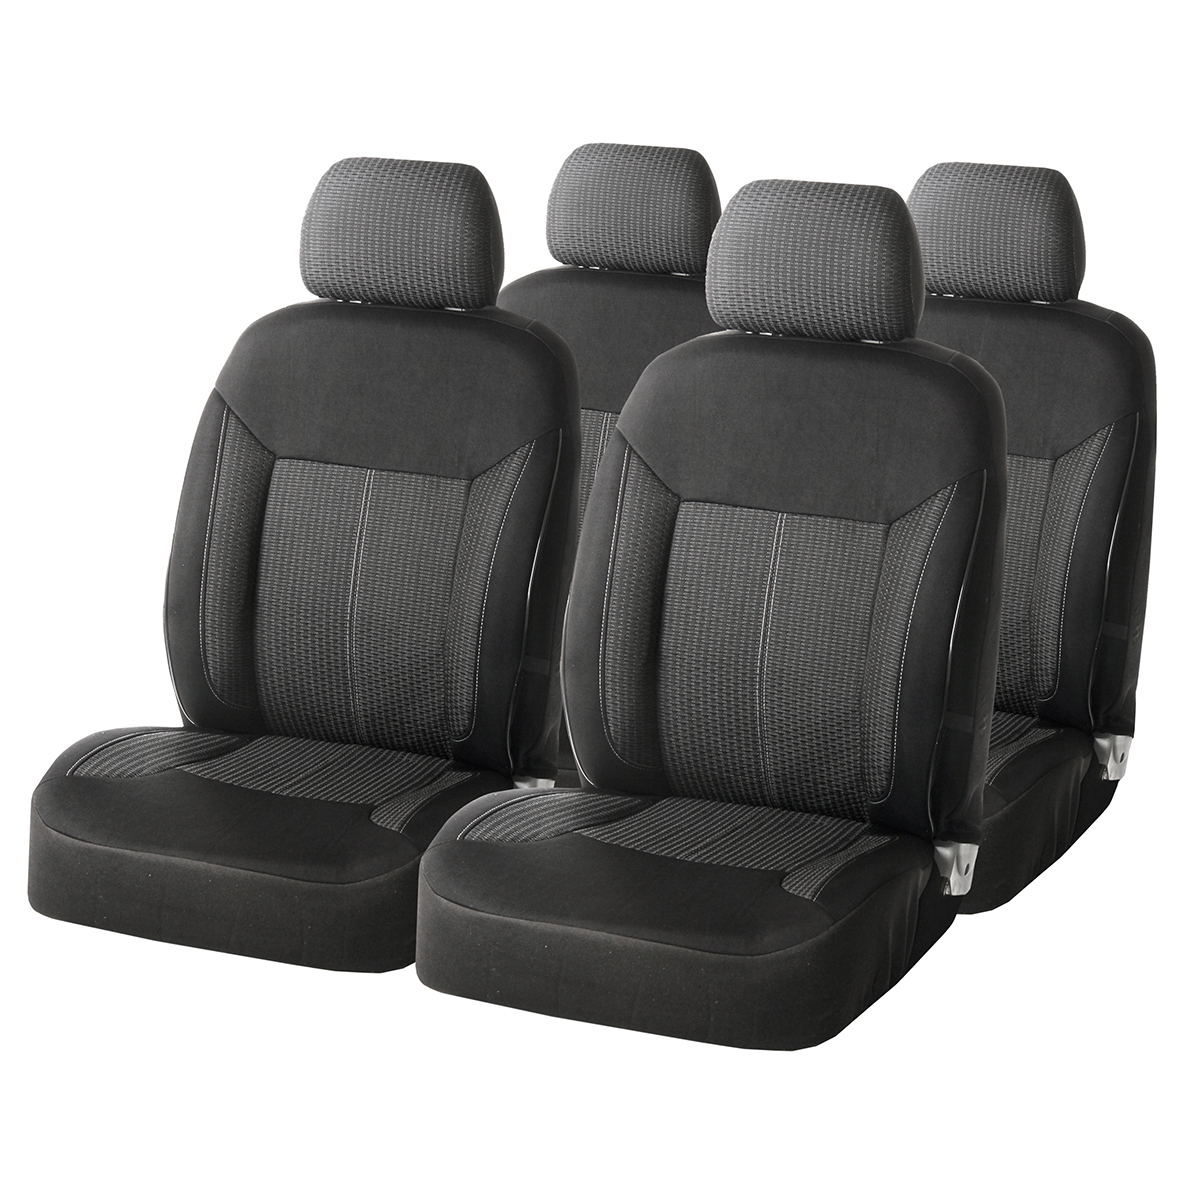 mothers-day-gift-guide/images/Seat-covers.jpeg